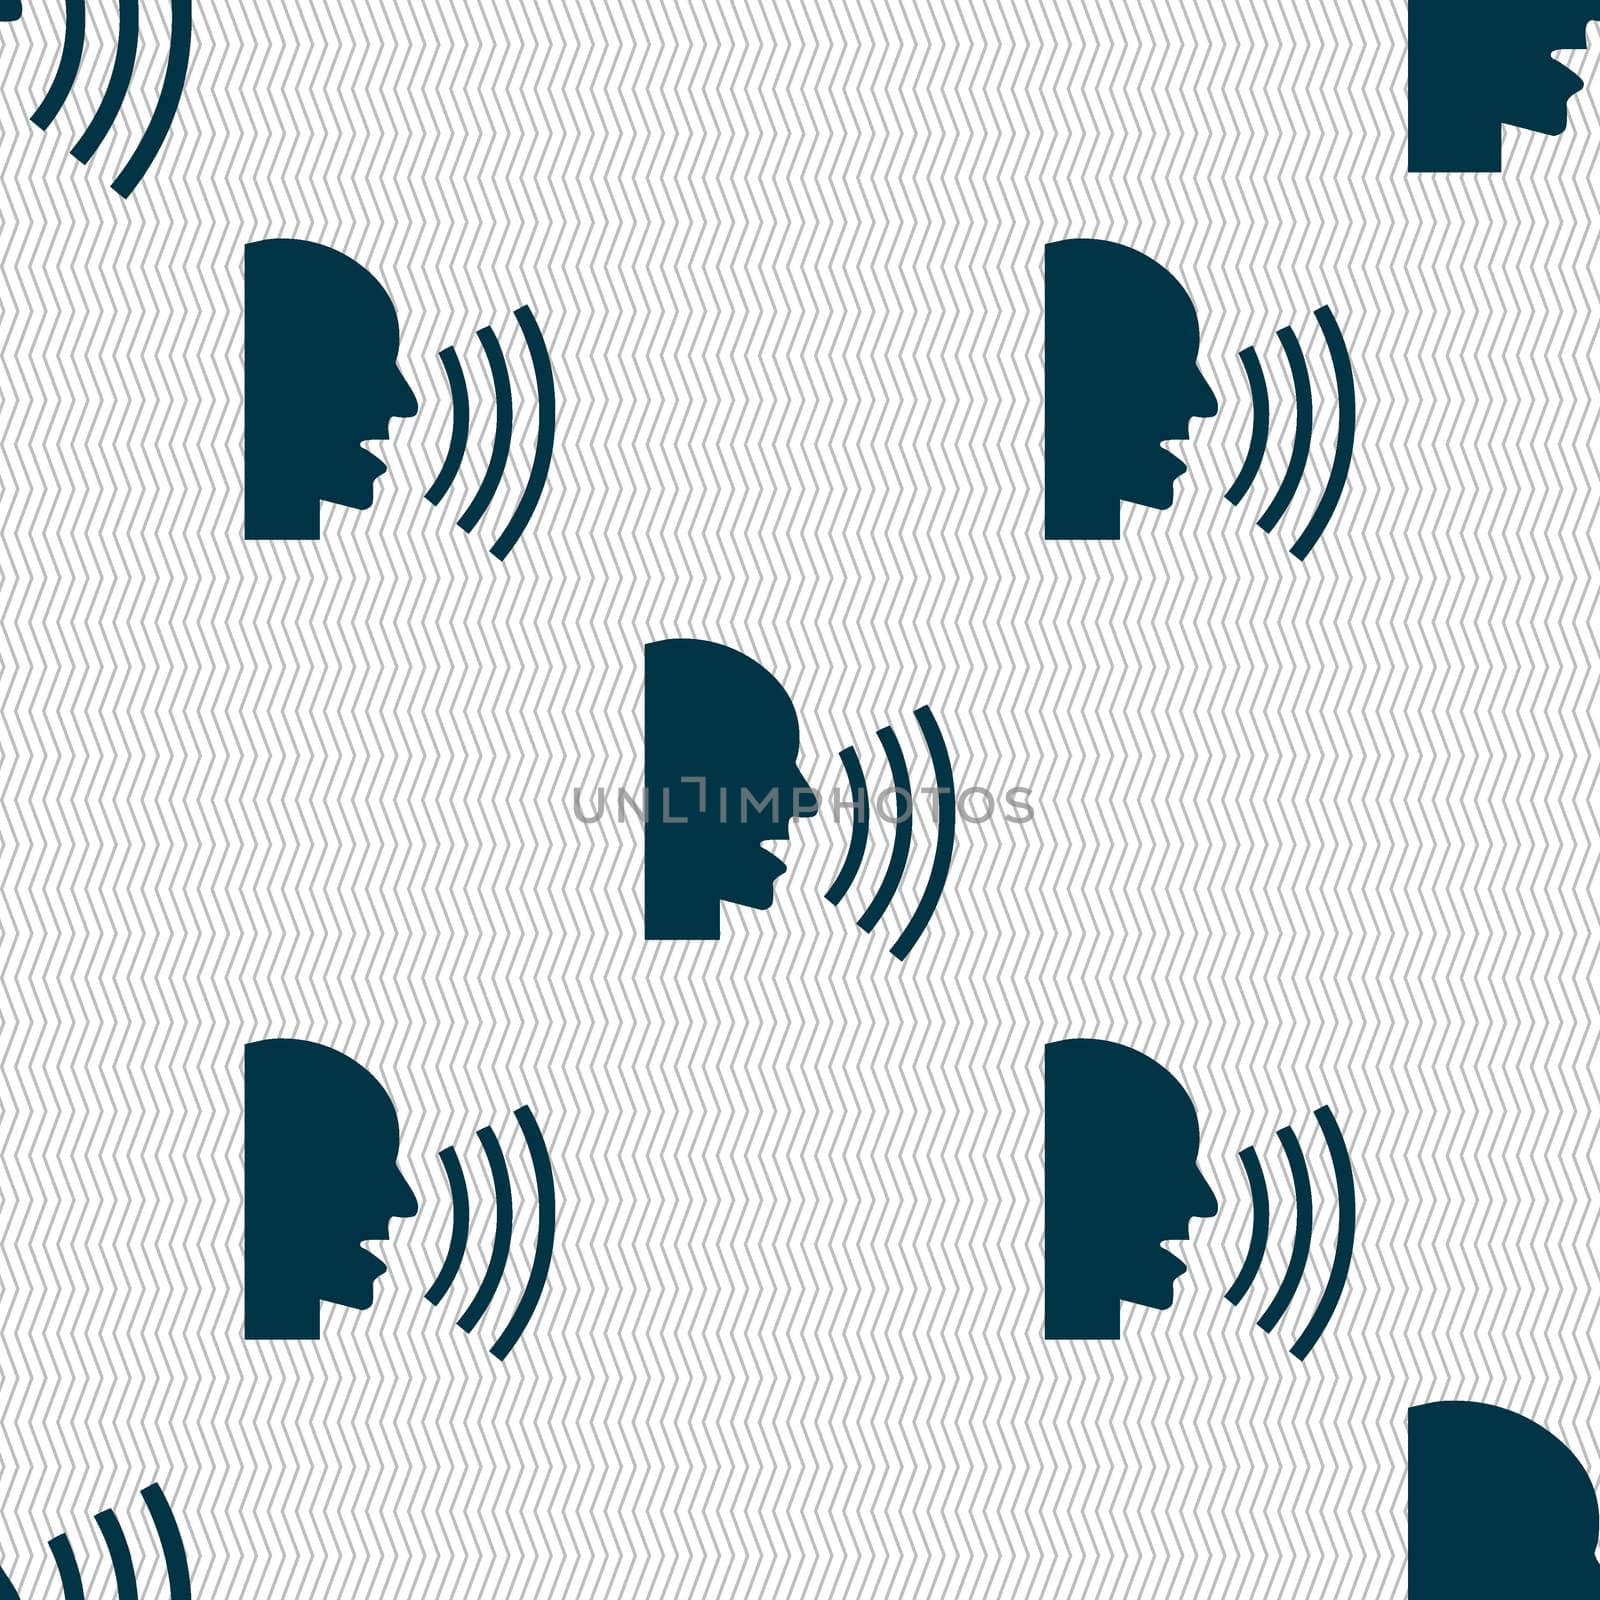 Talking Flat modern web icon. Seamless abstract background with geometric shapes.  by serhii_lohvyniuk